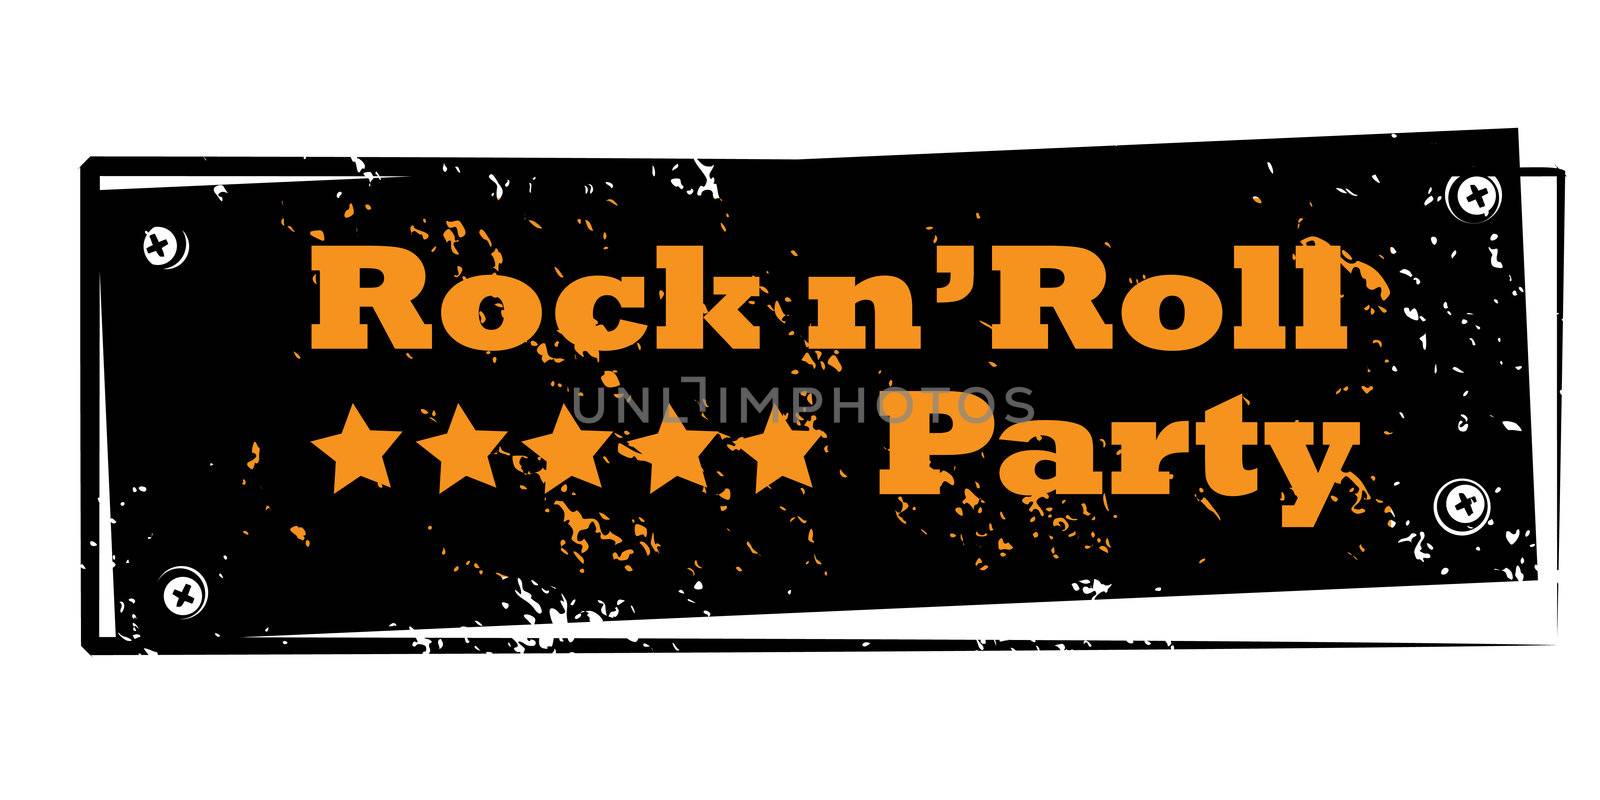 retro party music stamp for a night club or bar, rock n' roll seal with pop art design